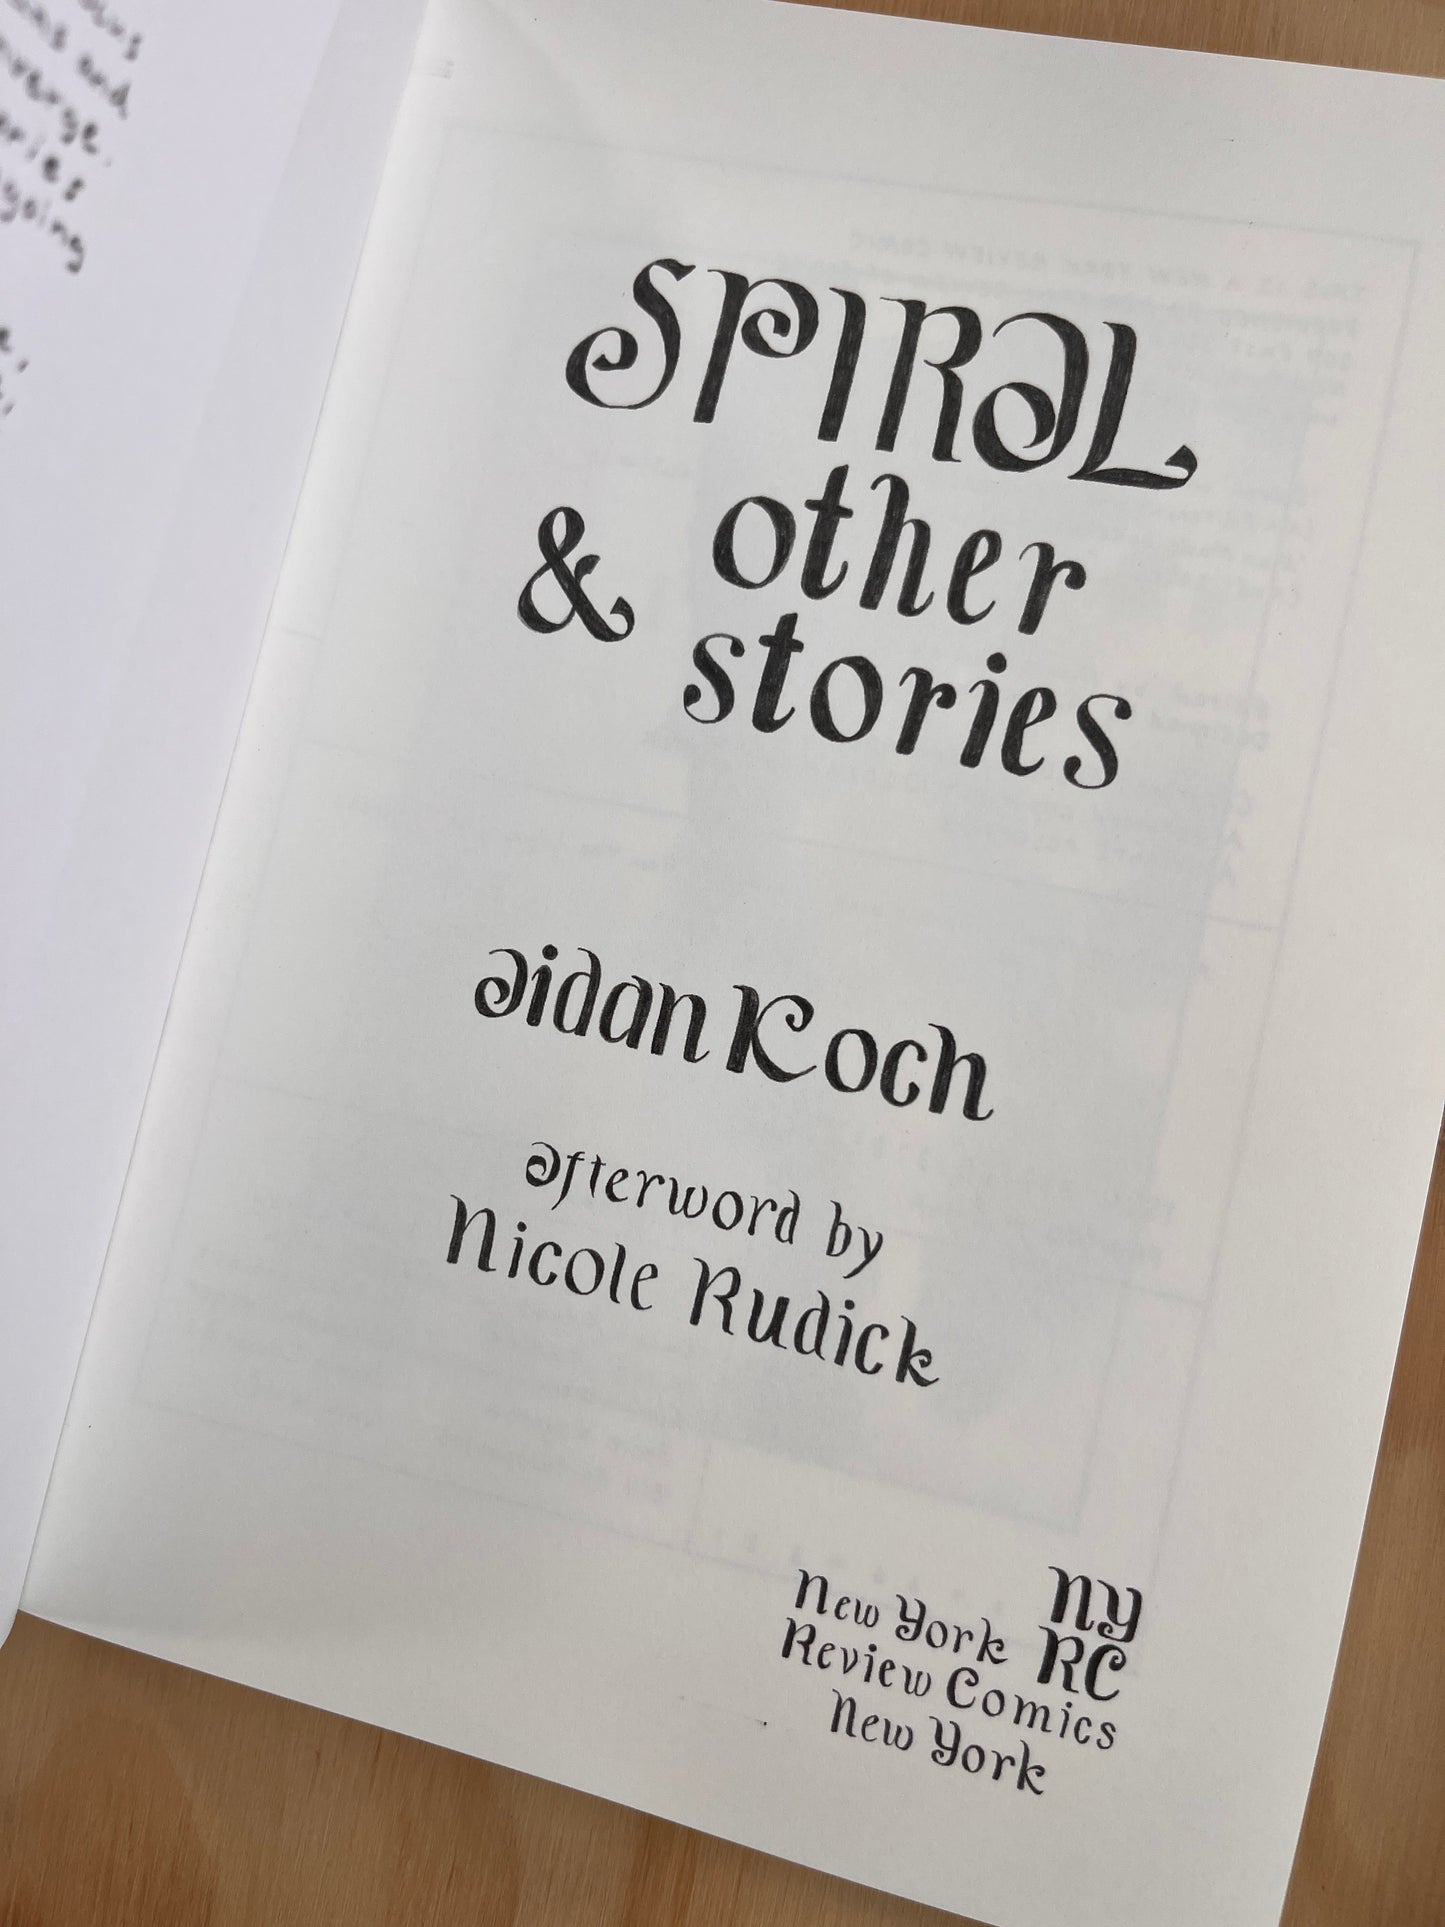 Spiral and Other Stories